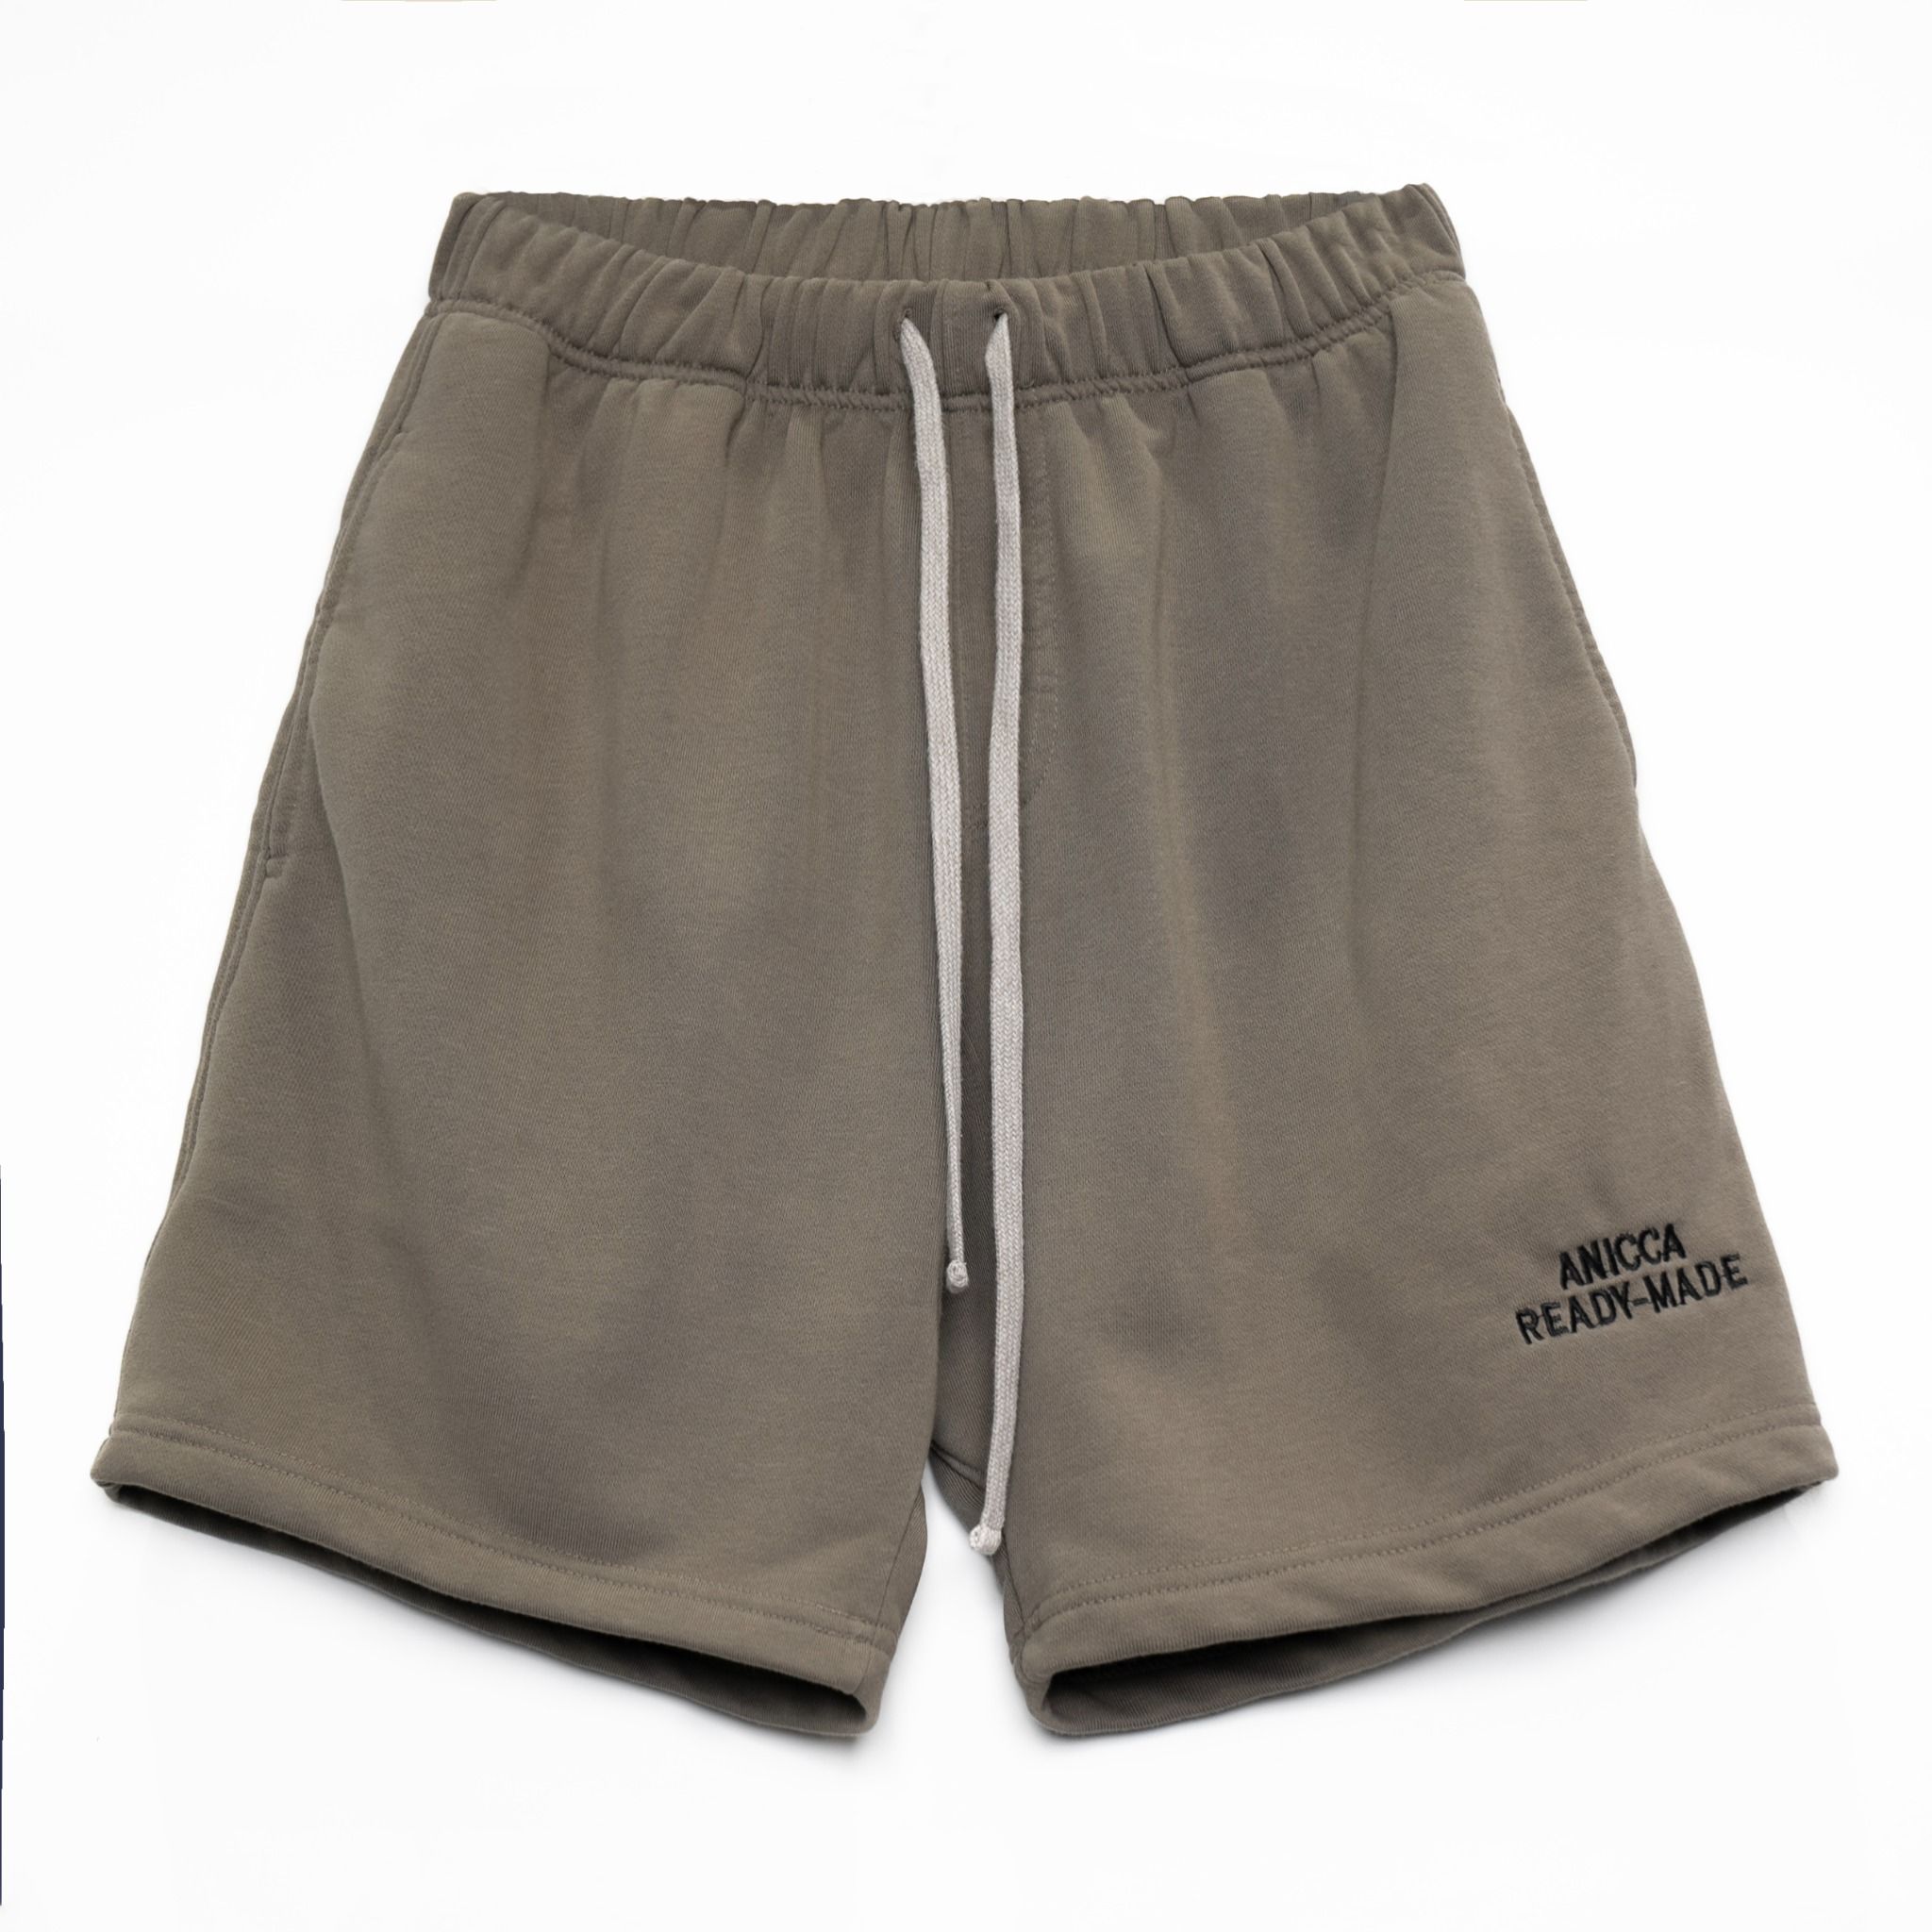  GUSSETED SHORTS - FUSCOUS GRAY 